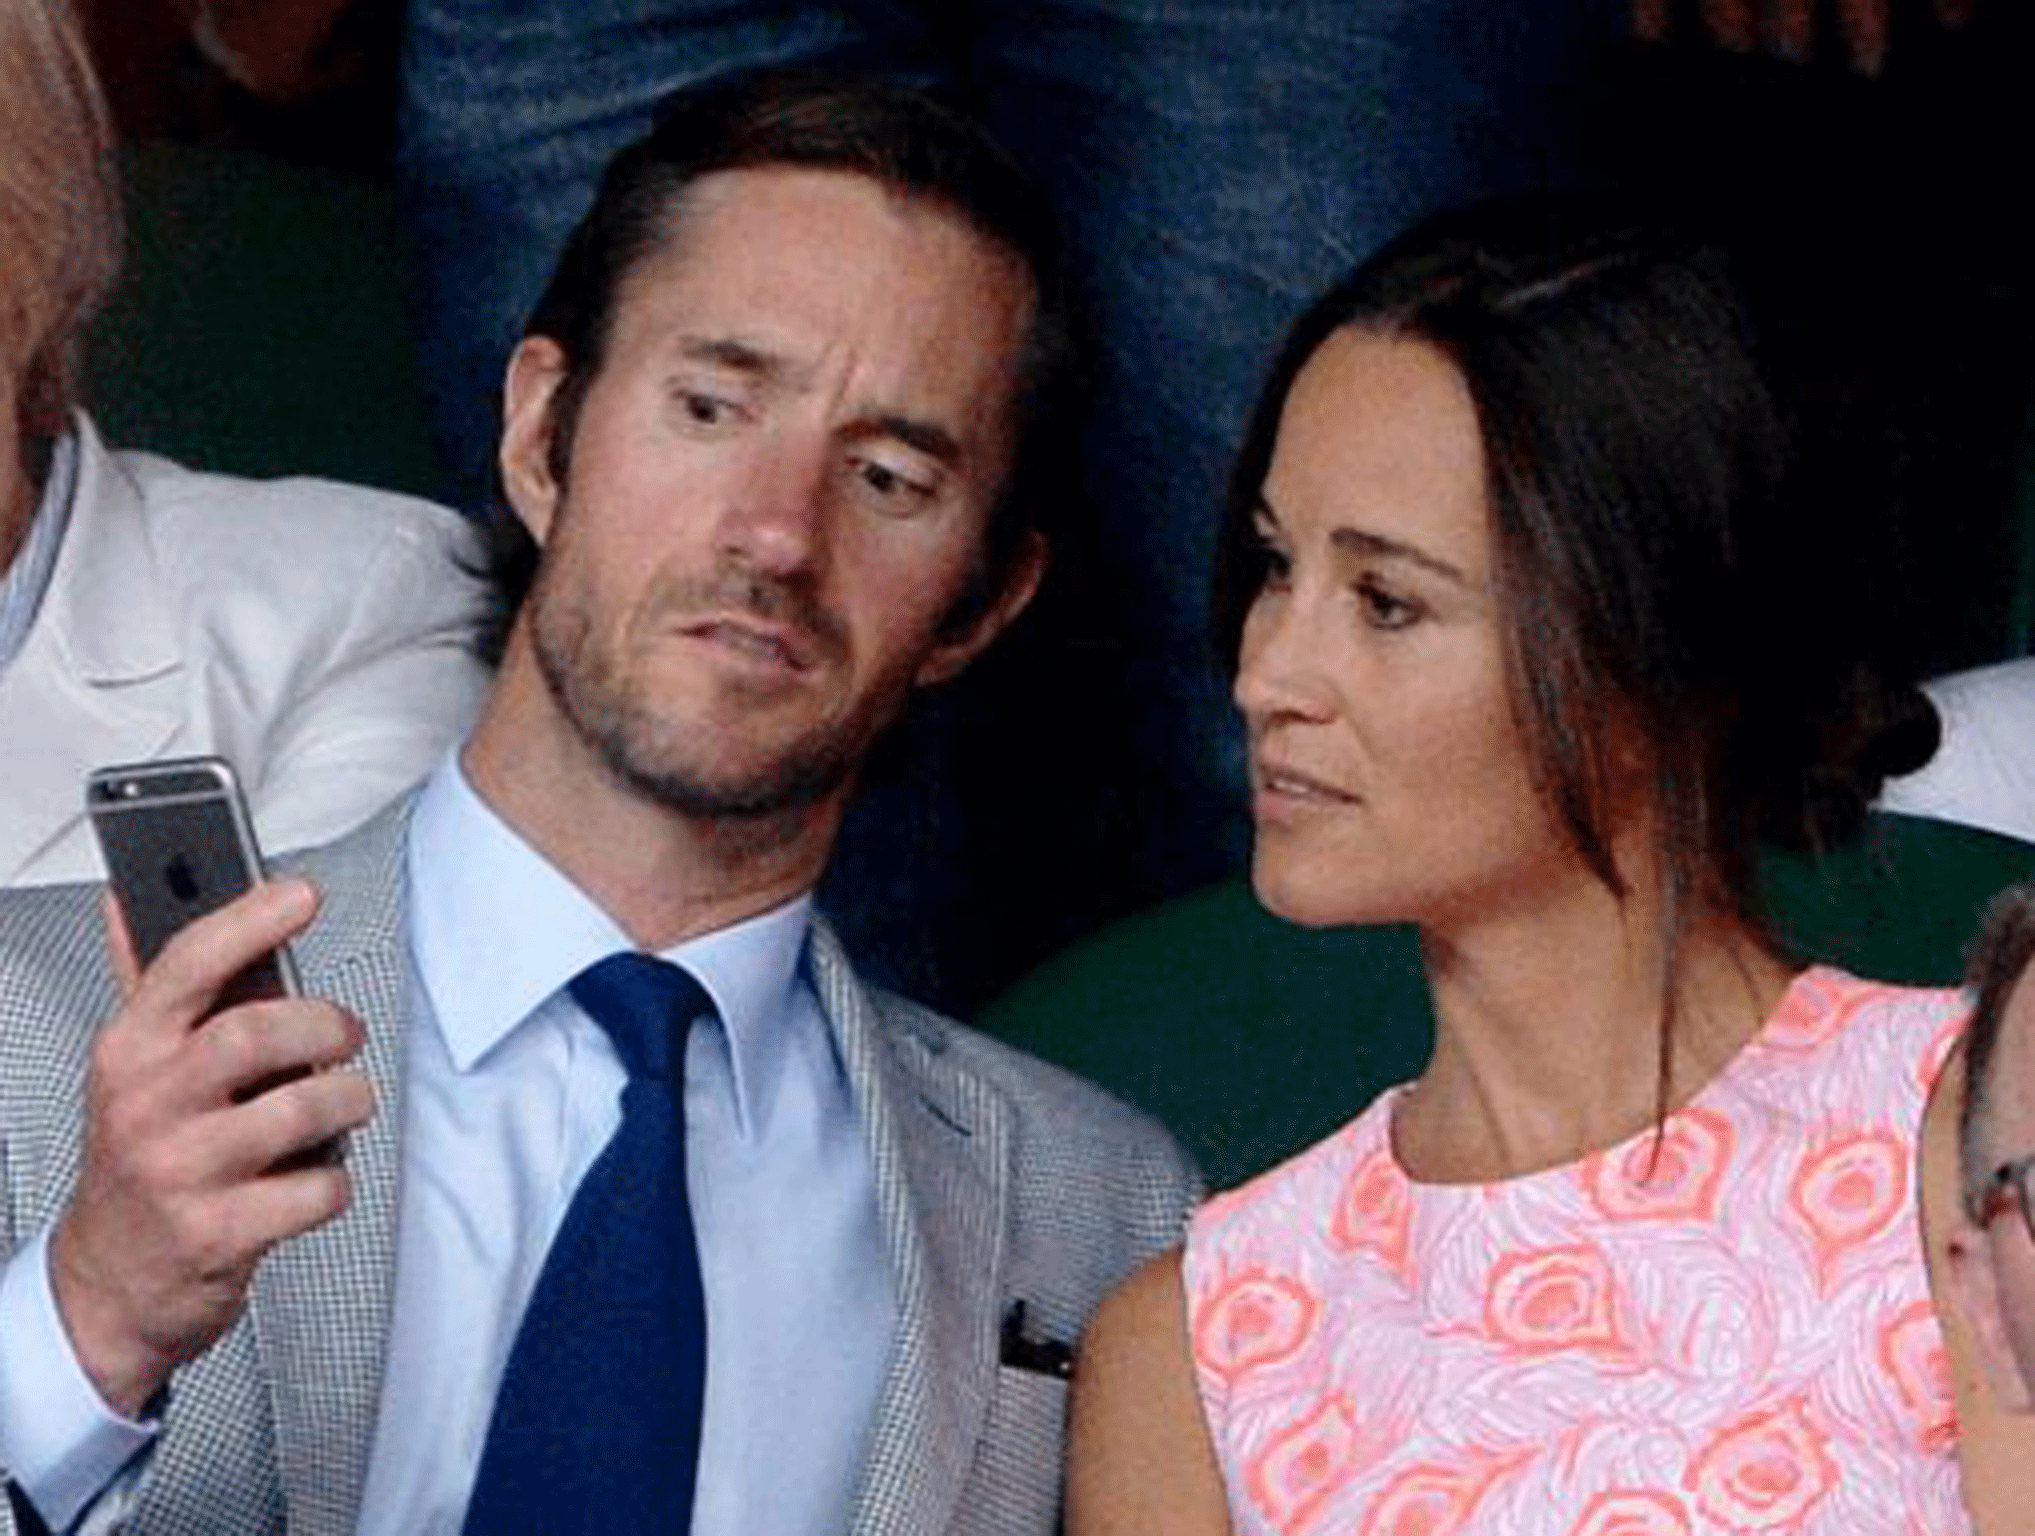 Matthews is a former professional racing driver and married Pippa Middleton in 2017